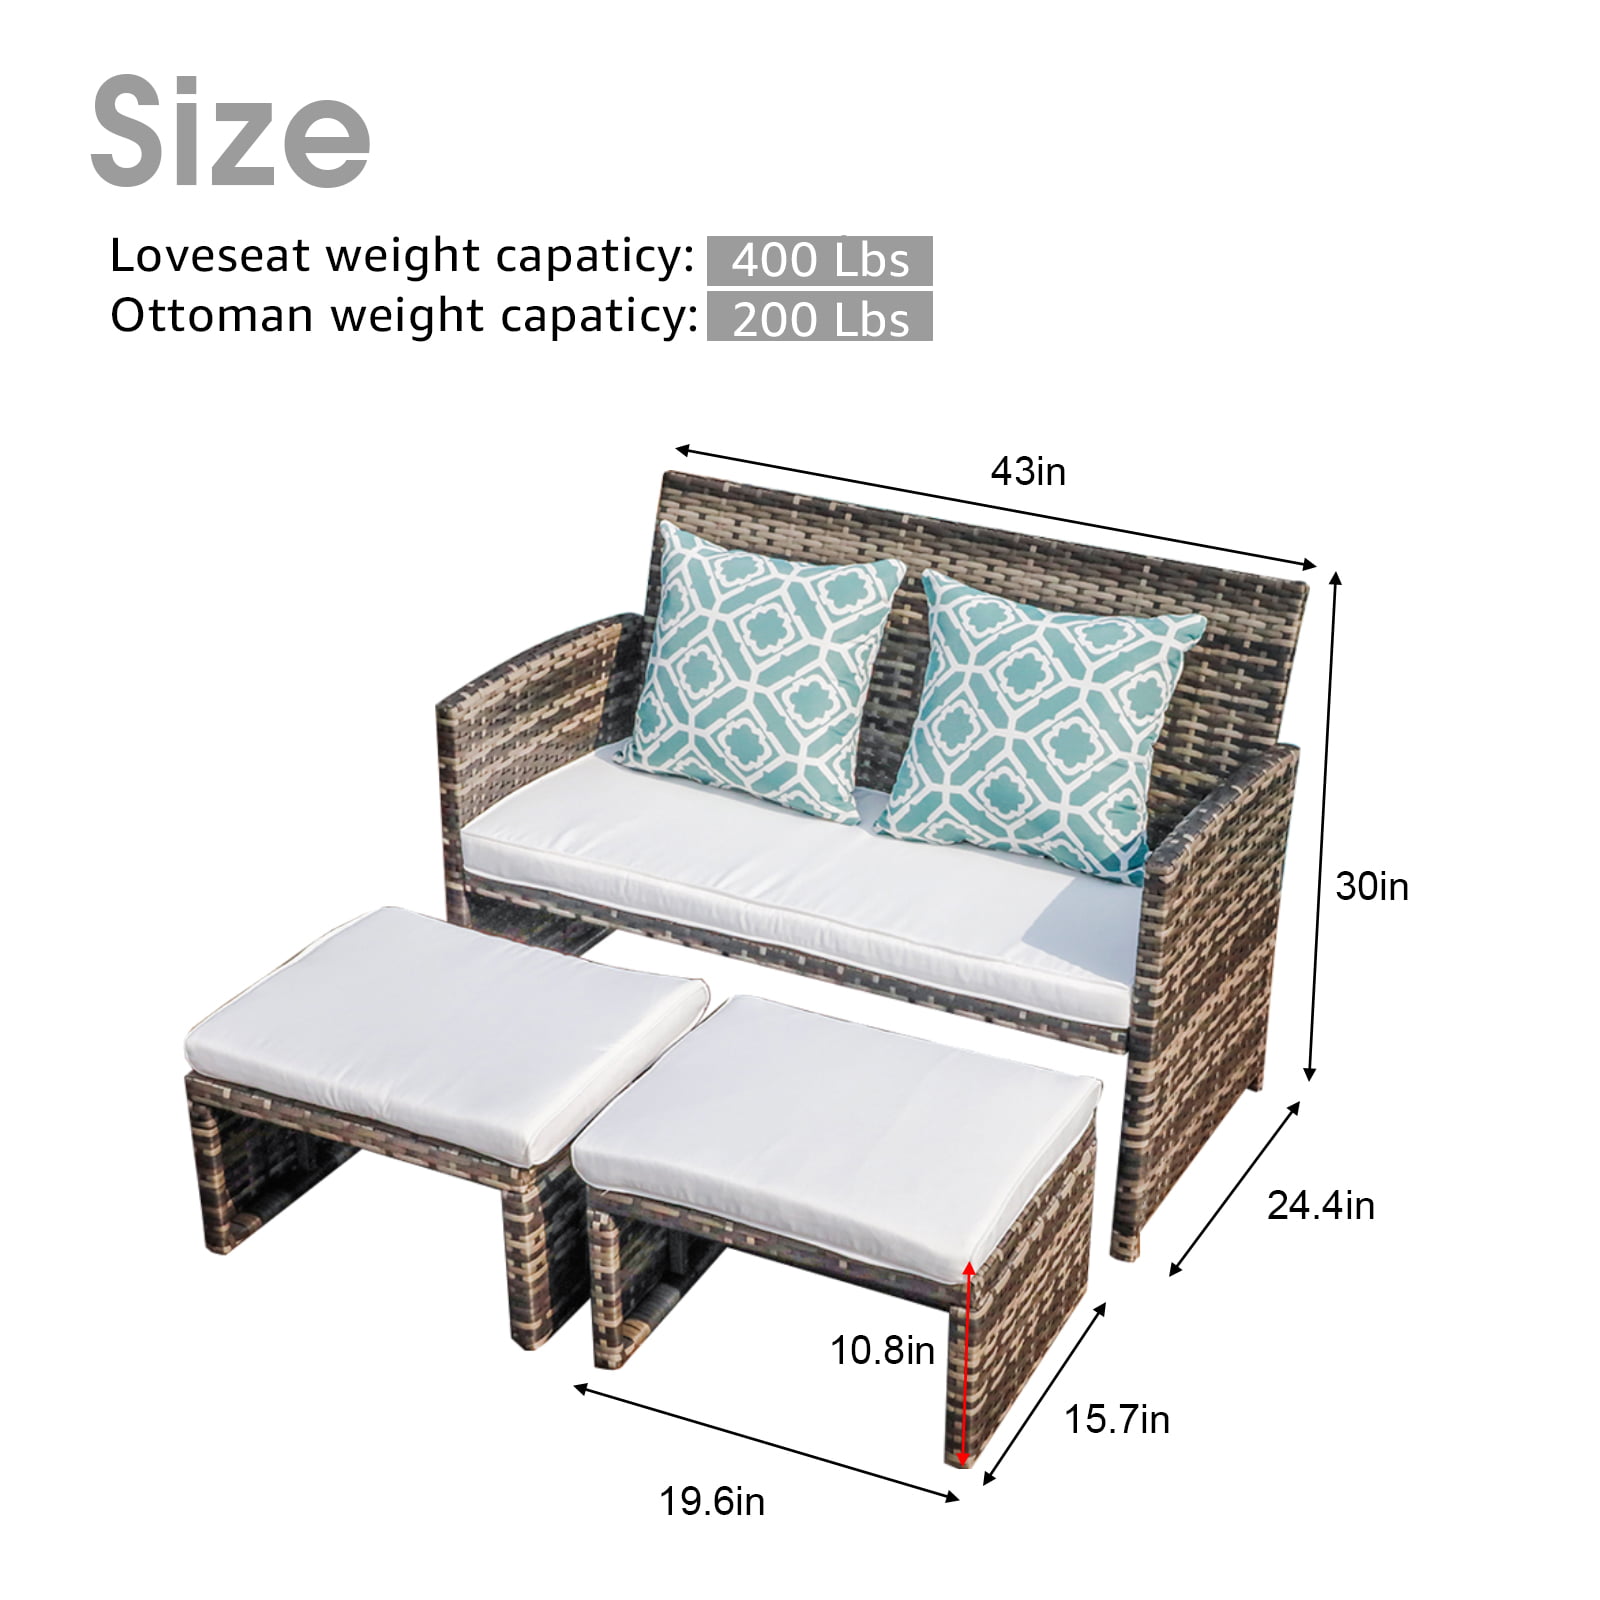 Outdoor Loveseat Chairs with Ottomans OC Orange-Casual Patio Furniture Wicker Conversation Set Pillows Included Gray Wicker 6 Pieces White Cushions 